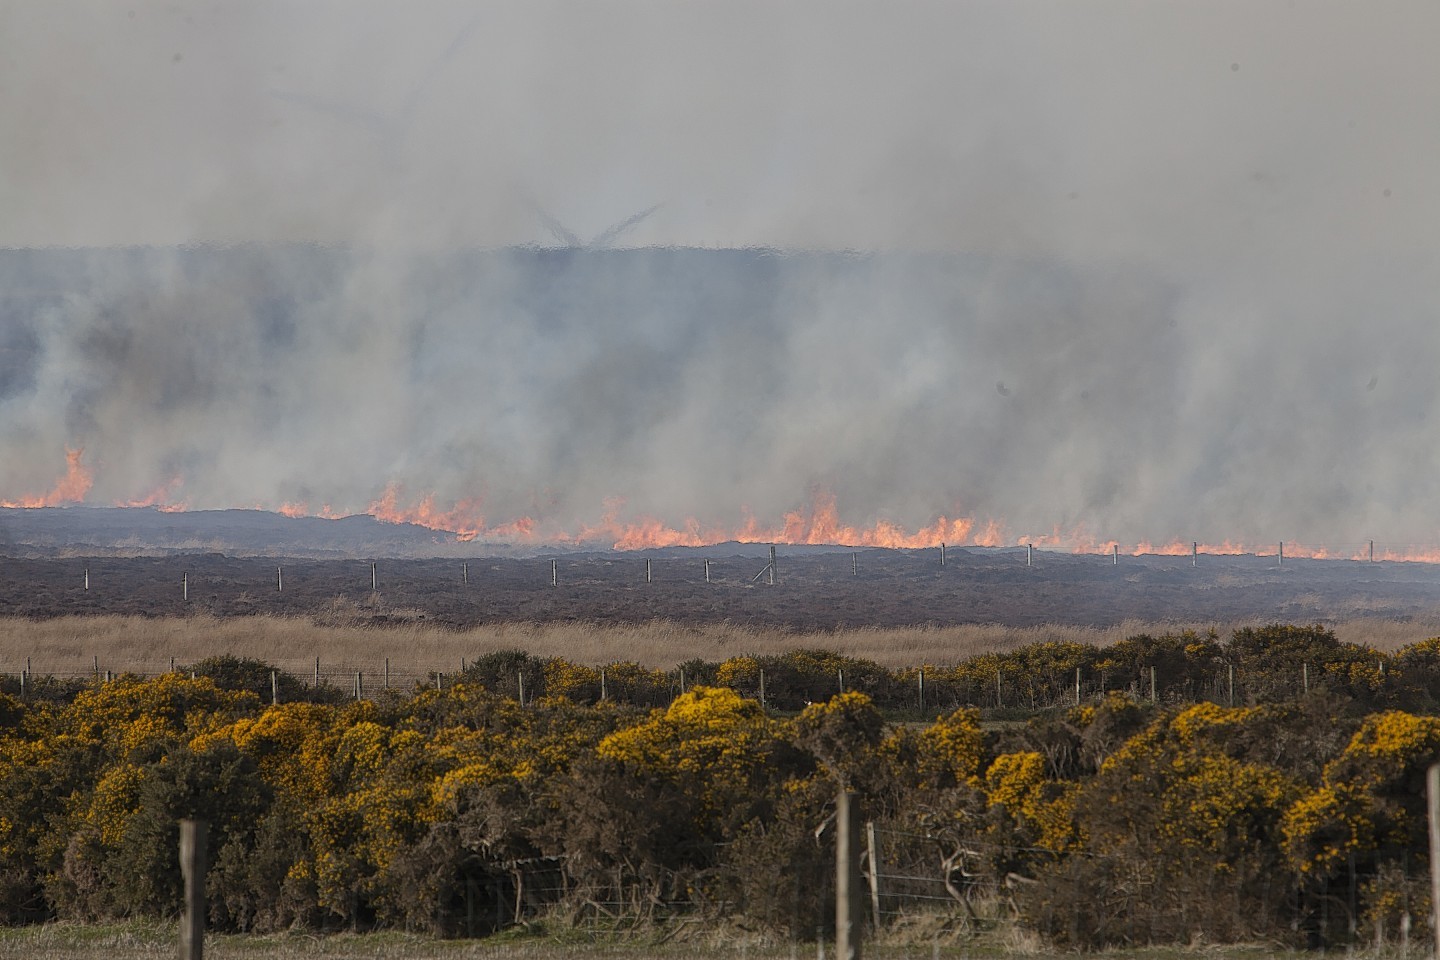 The wildfire at Keiss burned over a mile long.